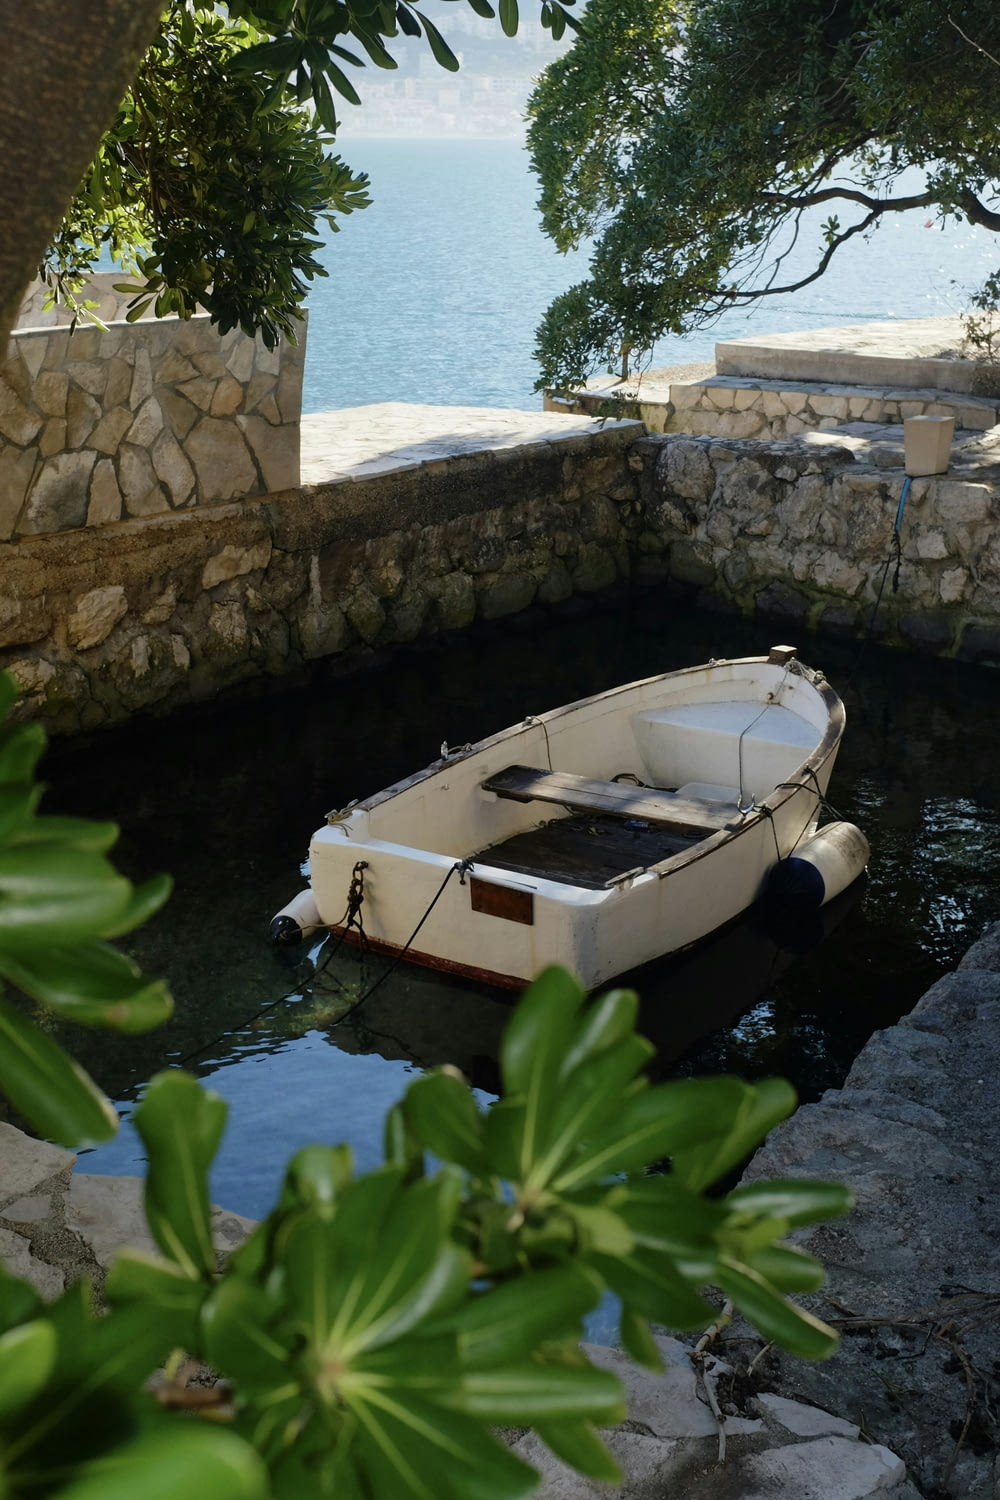 a small boat in the water near a stone wall